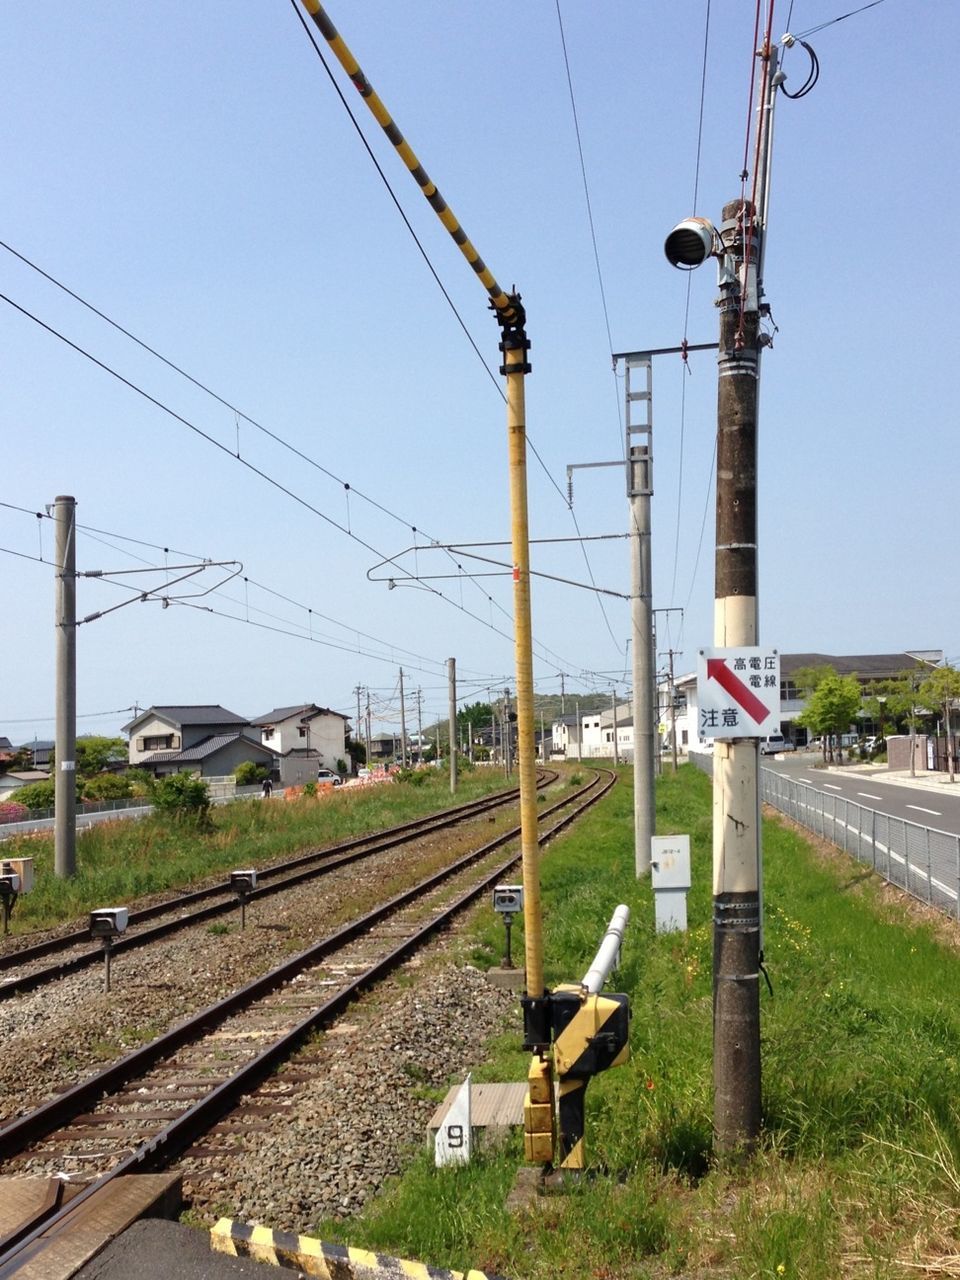 railroad track, clear sky, power line, electricity pylon, transportation, rail transportation, power supply, fuel and power generation, electricity, cable, blue, built structure, connection, sky, building exterior, road, public transportation, day, architecture, power cable